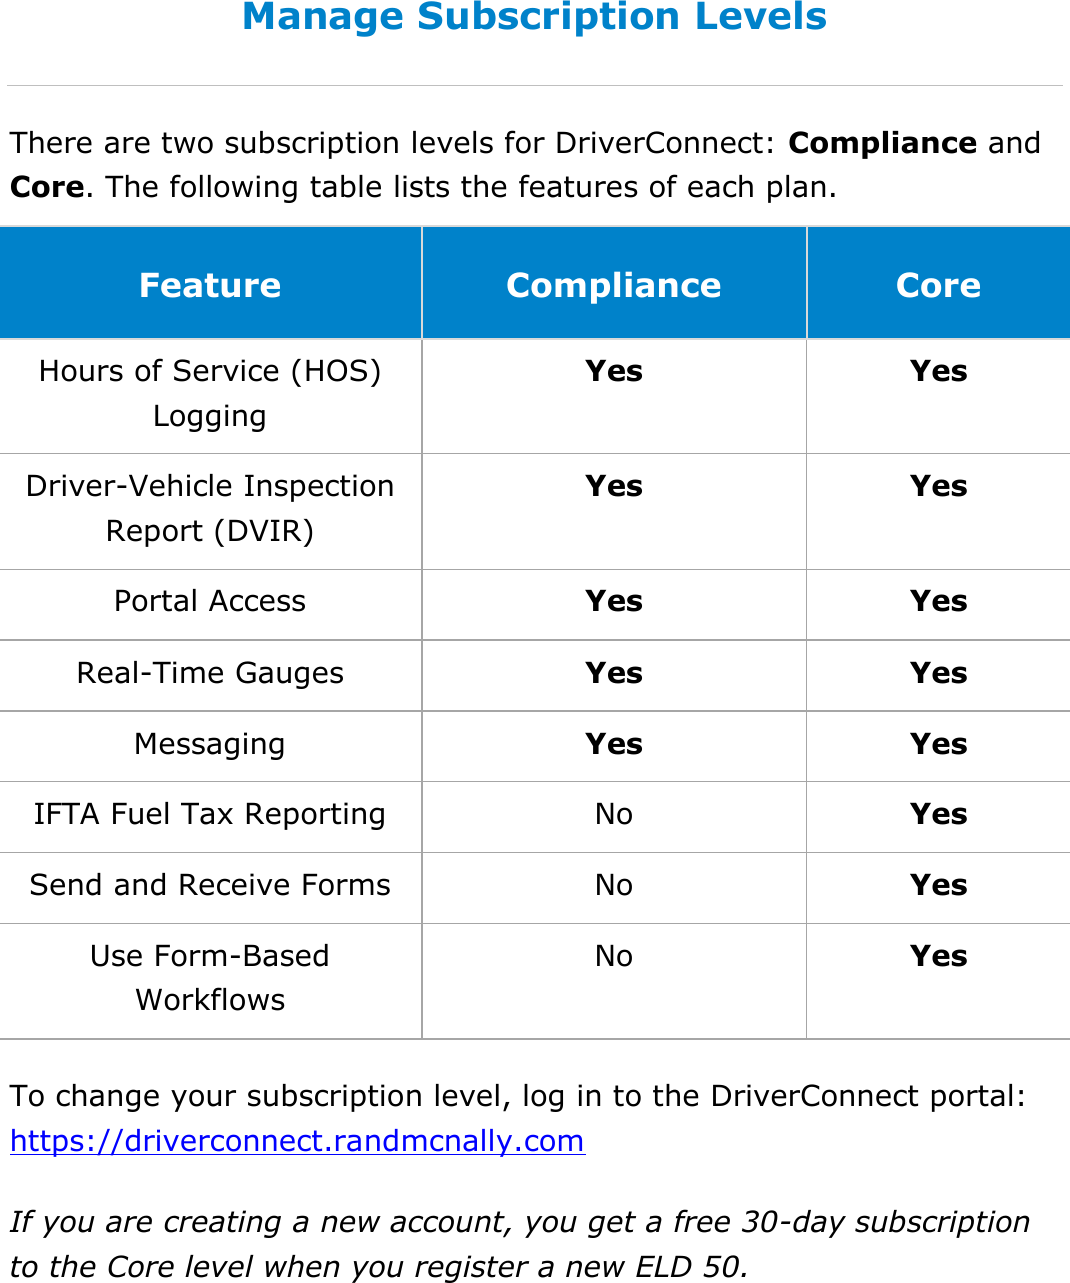 Change My Settings DriverConnect User Guide  89 © 2016-2017, Rand McNally, Inc. Manage Subscription Levels There are two subscription levels for DriverConnect: Compliance and Core. The following table lists the features of each plan. Feature Compliance Core Hours of Service (HOS) Logging Yes Yes Driver-Vehicle Inspection Report (DVIR) Yes Yes Portal Access Yes Yes Real-Time Gauges Yes Yes Messaging Yes Yes IFTA Fuel Tax Reporting No Yes Send and Receive Forms No Yes Use Form-Based Workflows No Yes To change your subscription level, log in to the DriverConnect portal: https://driverconnect.randmcnally.com If you are creating a new account, you get a free 30-day subscription to the Core level when you register a new ELD 50. 